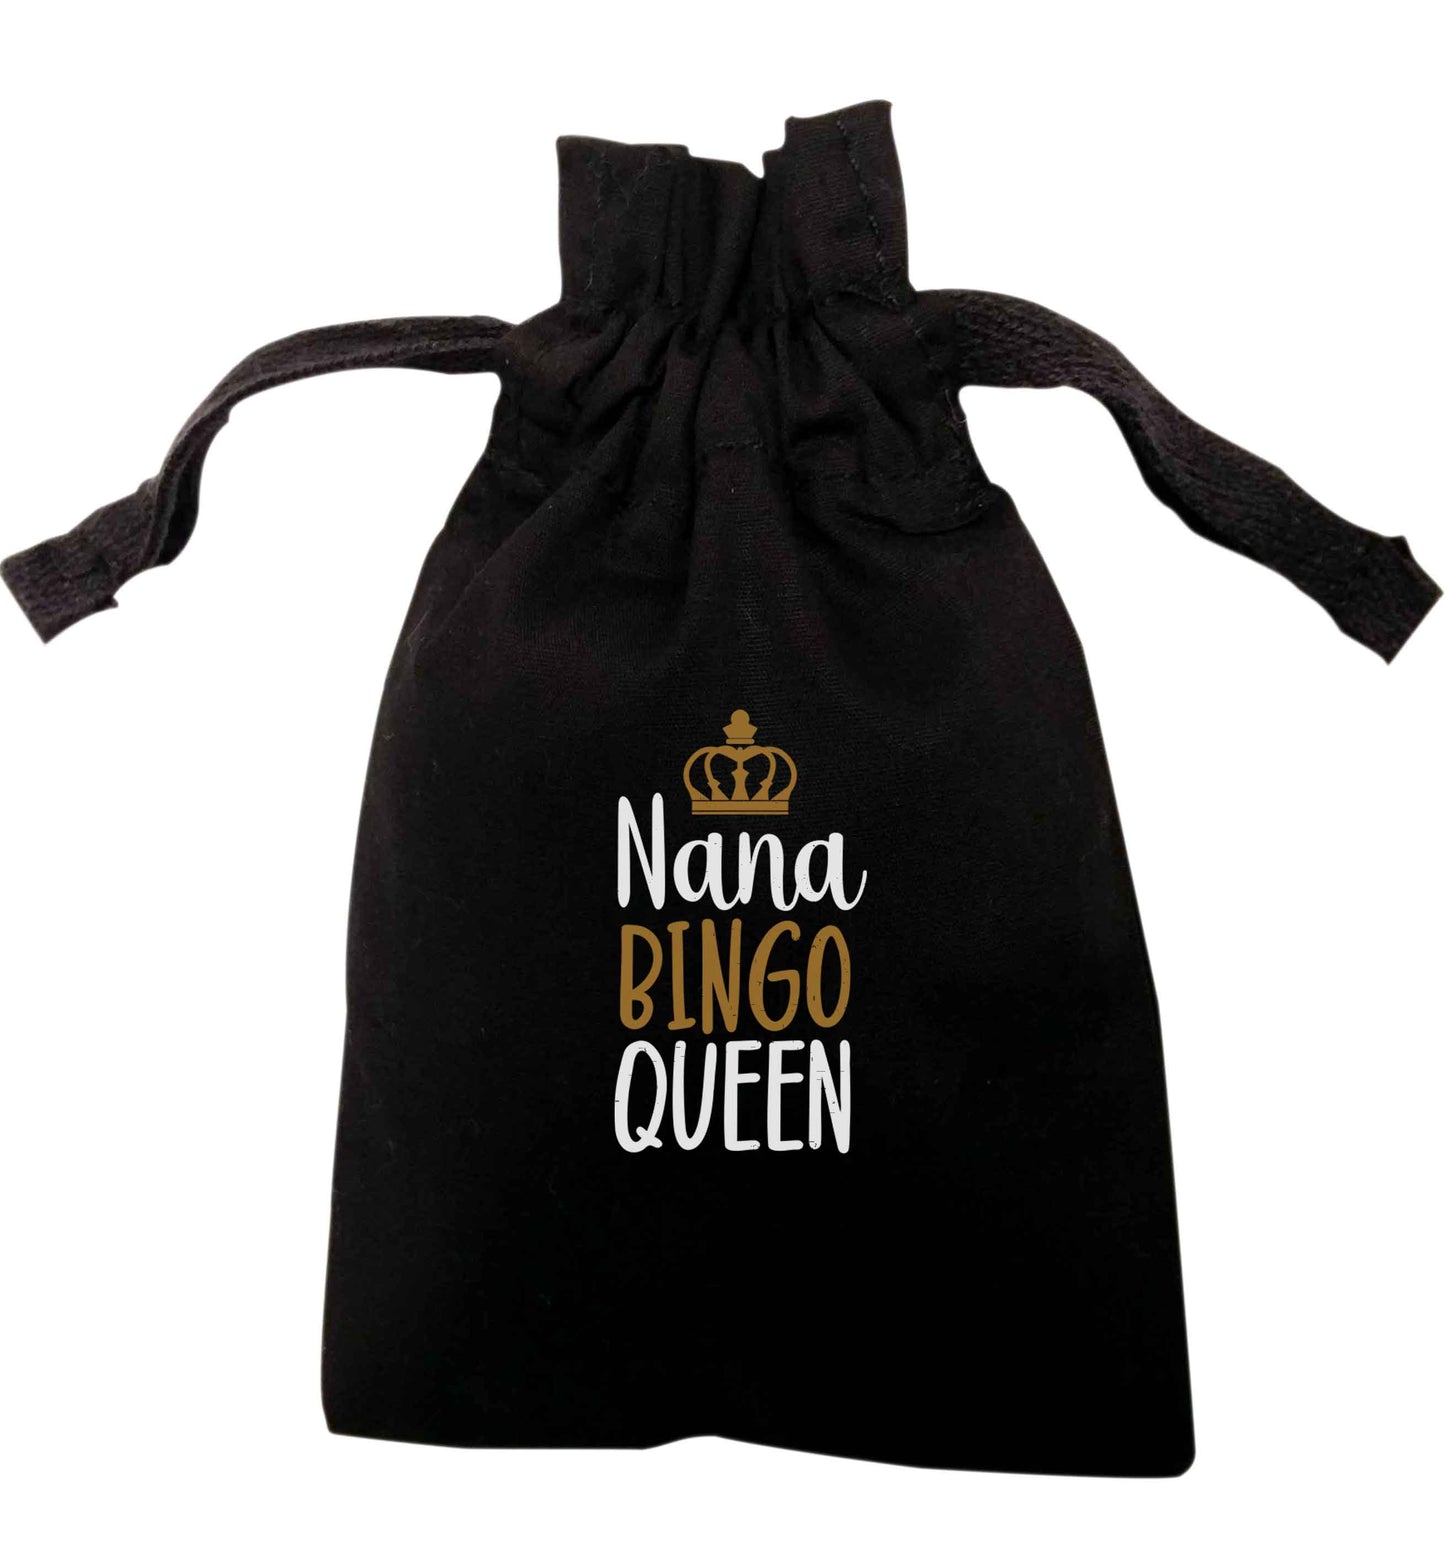 Personalised bingo queen | XS - L | Pouch / Drawstring bag / Sack | Organic Cotton | Bulk discounts available!